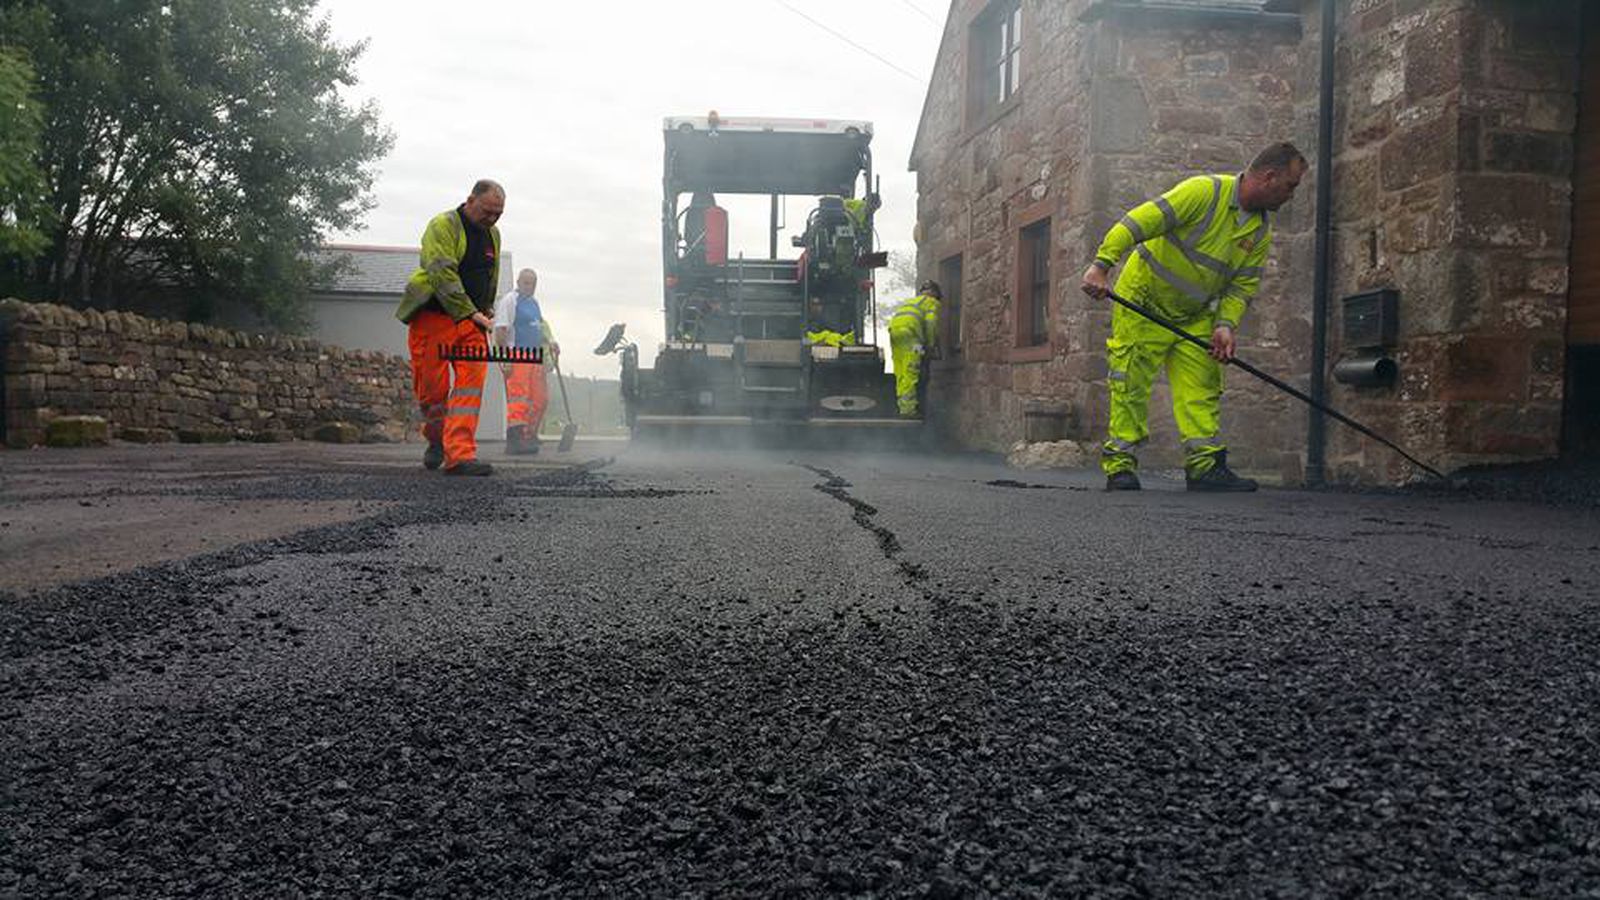 UK startup uses recycled plastic to build stronger roads